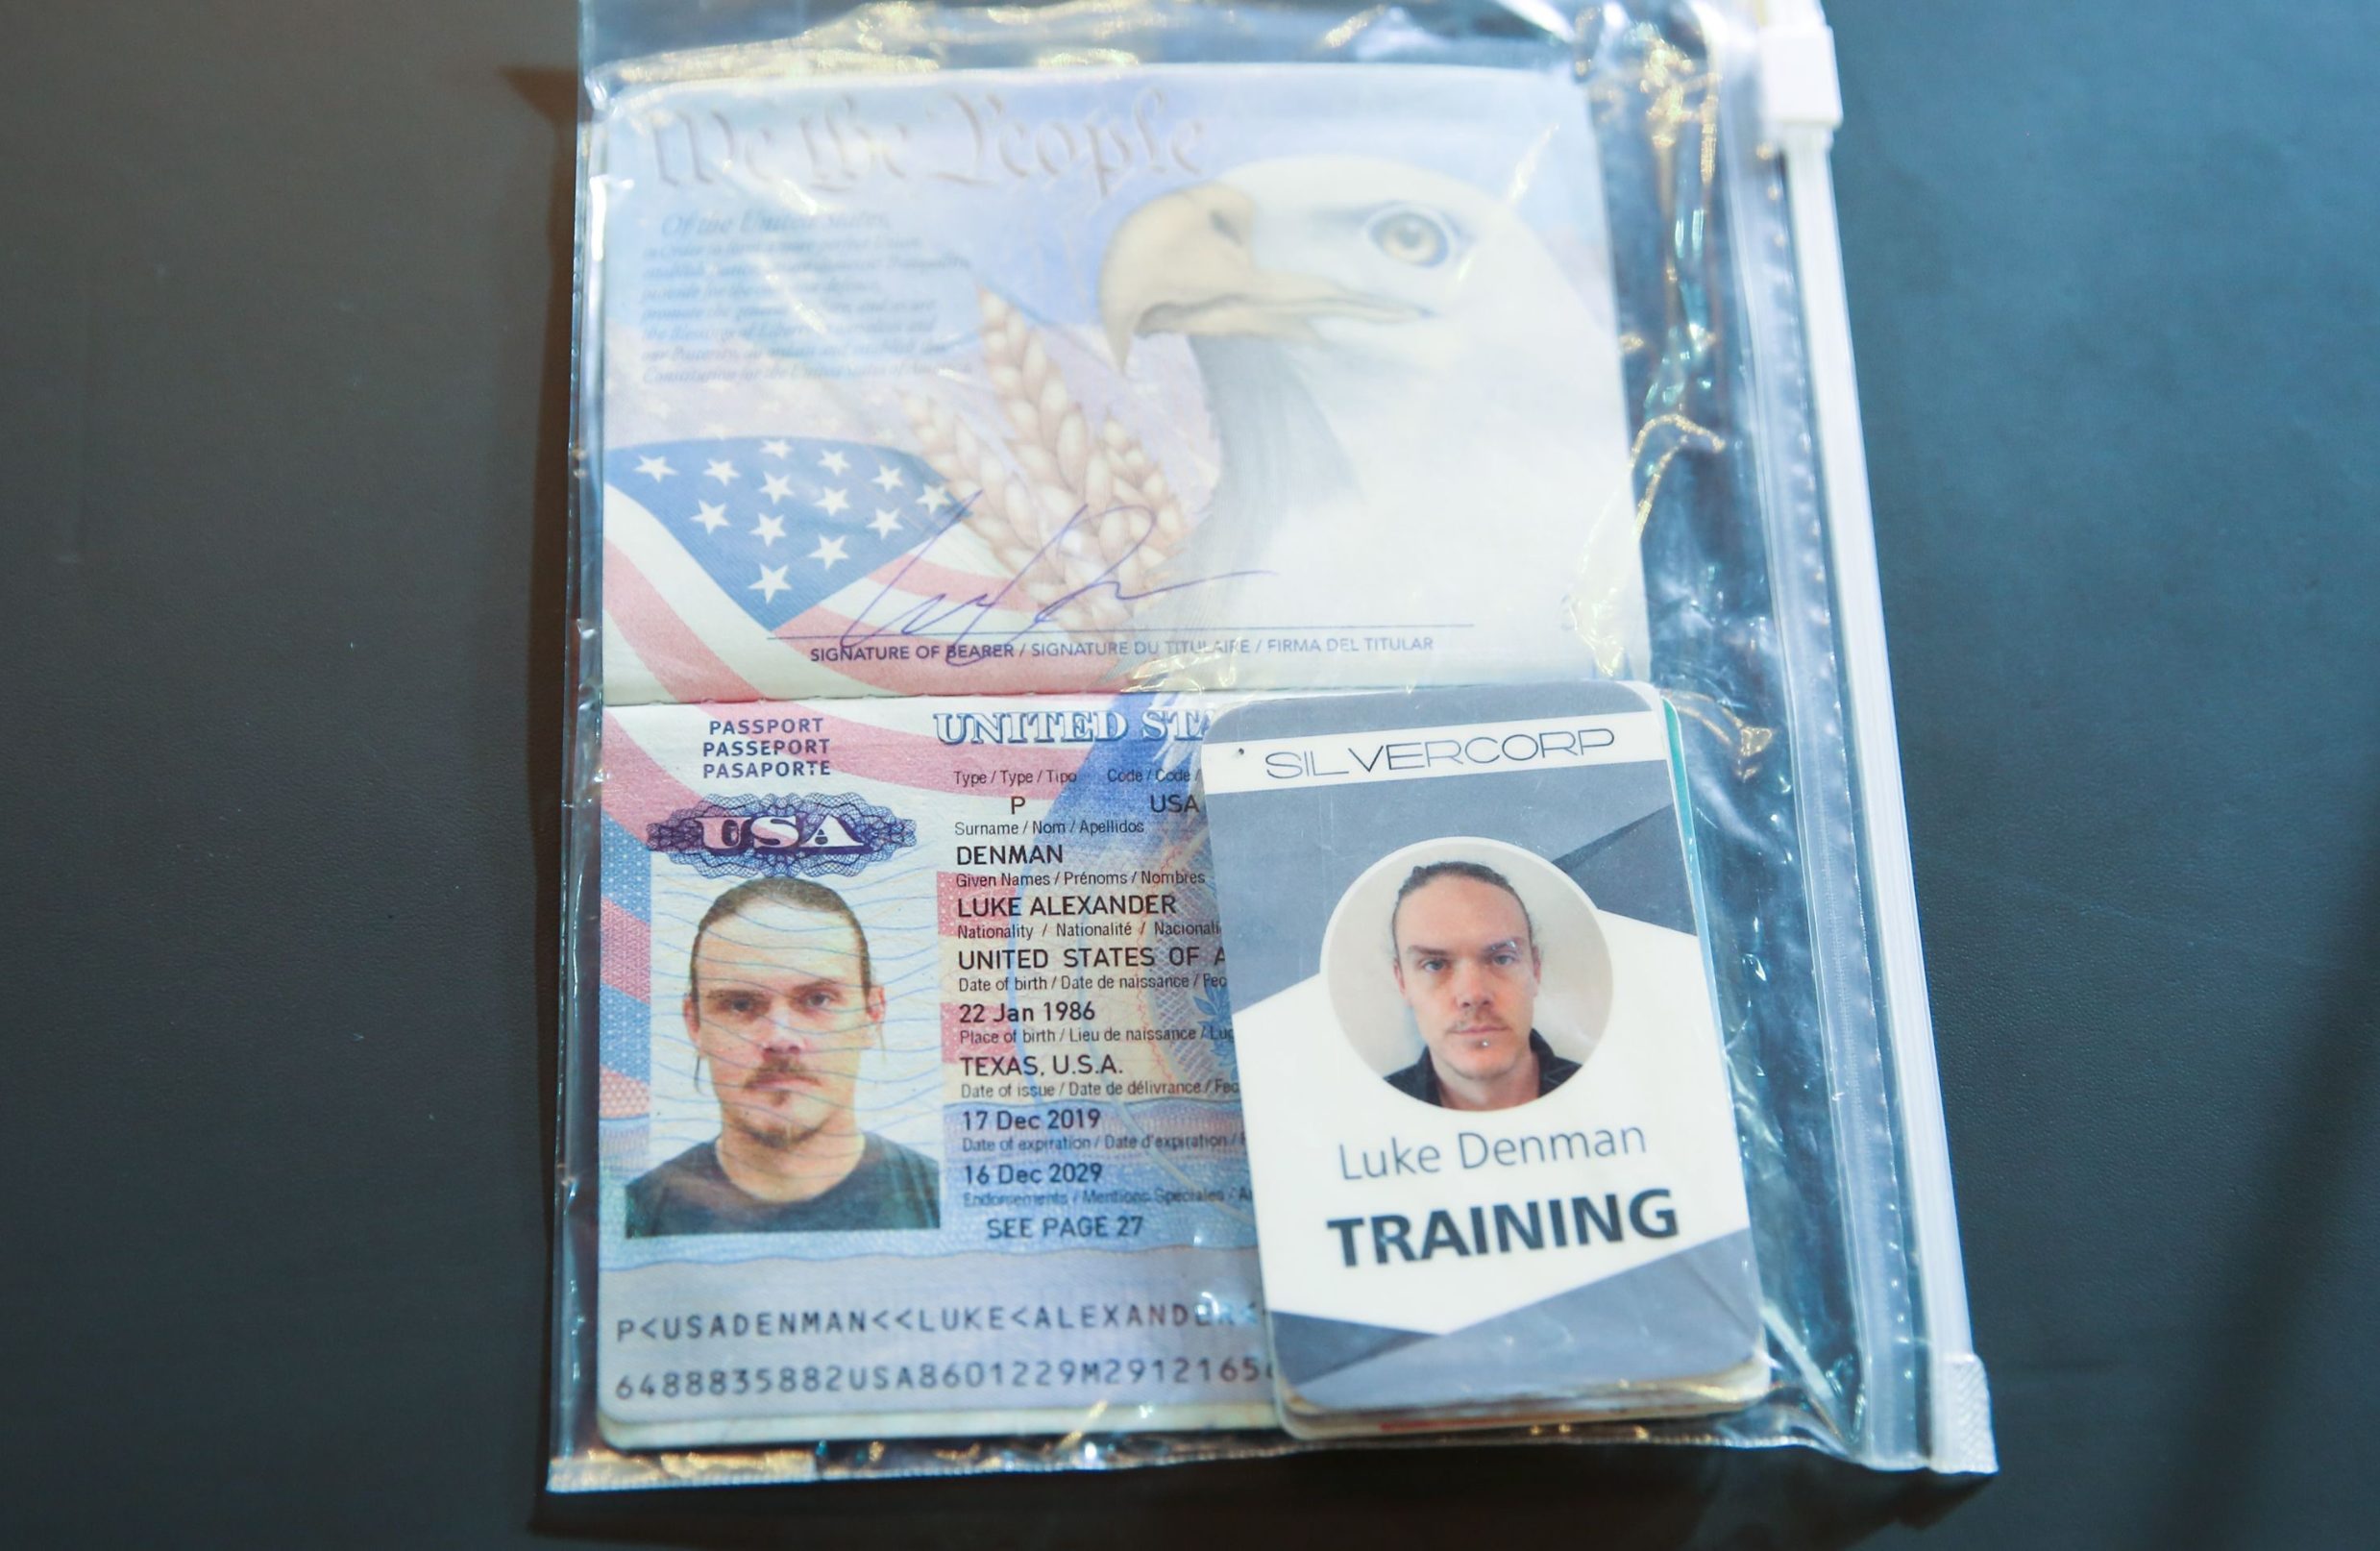 Handout picture released by the Venezuelan Presidency showing the passport of arrrested US citizen Luke Deman, during a video conference meeting with international media correspondents, at Miraflores Presidential Palace in Caracas, on May 6, 2020. - Venezuela is to try two Americans, identified as Luke Denman and Airan Berry, allegedly captured during a failed sea attack by mercenaries, President Nicolas Maduro said on May 6. (Photo by Marcelo Garcia / Venezuelan Presidency / AFP) / RESTRICTED TO EDITORIAL USE - MANDATORY CREDIT 